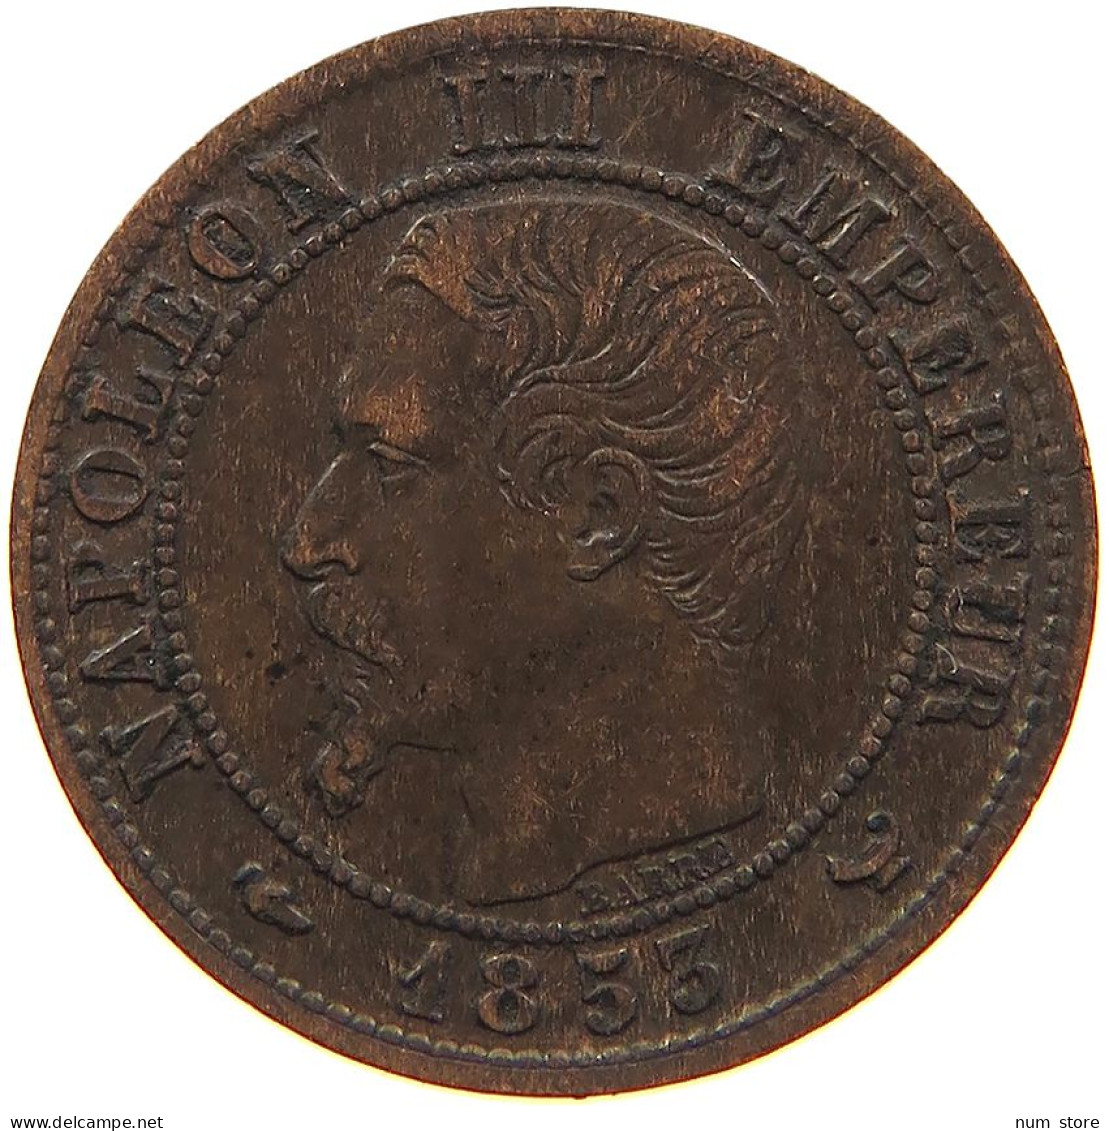 FRANCE 1 CENTIME 1853 W #s081 0297 - 1 Centime